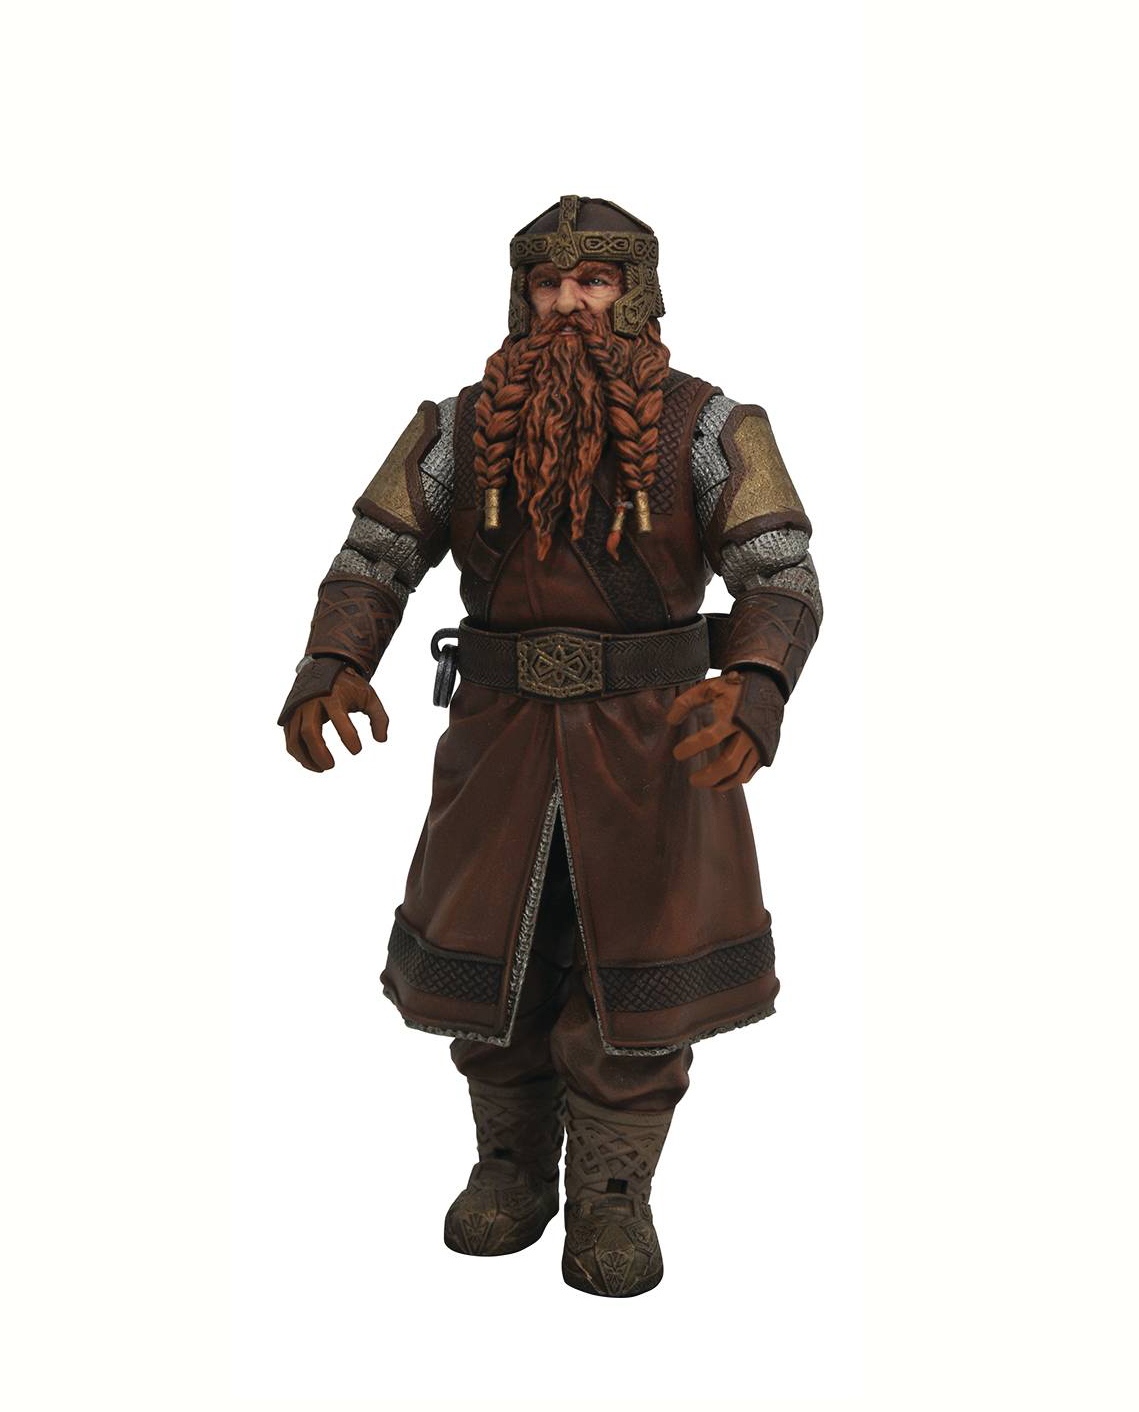 Lord of the Rings 7" Action Figure: Series 1 - Gimli